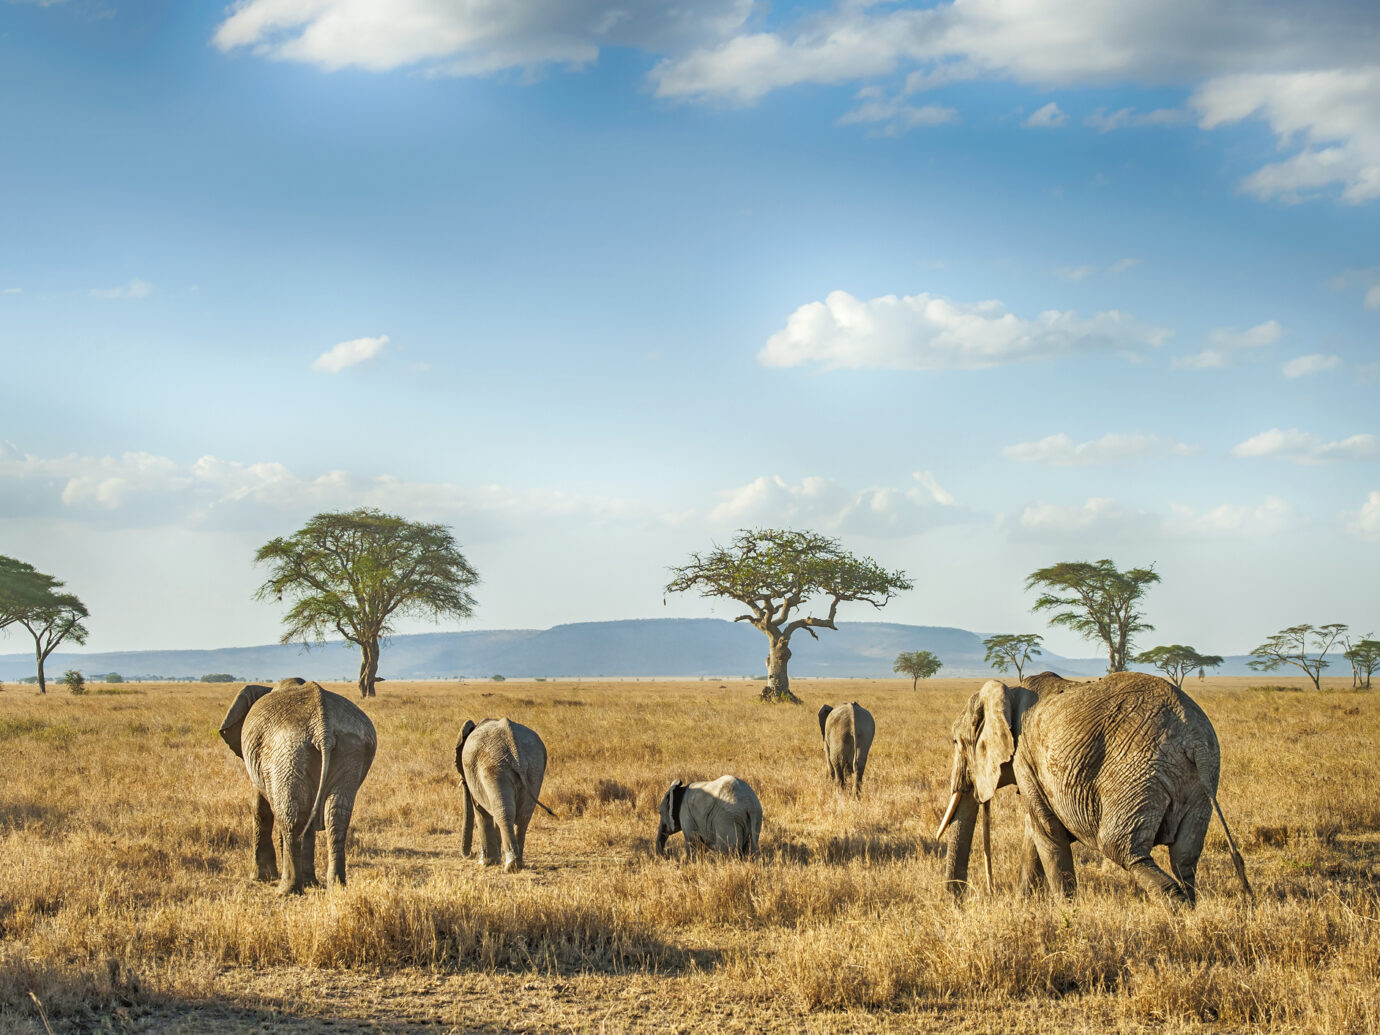 'A small group of African Elephants in different ages is moving in the plains of Serengeti.Location: Serengeti National Park, Tanzania. Shot in wildlife.'